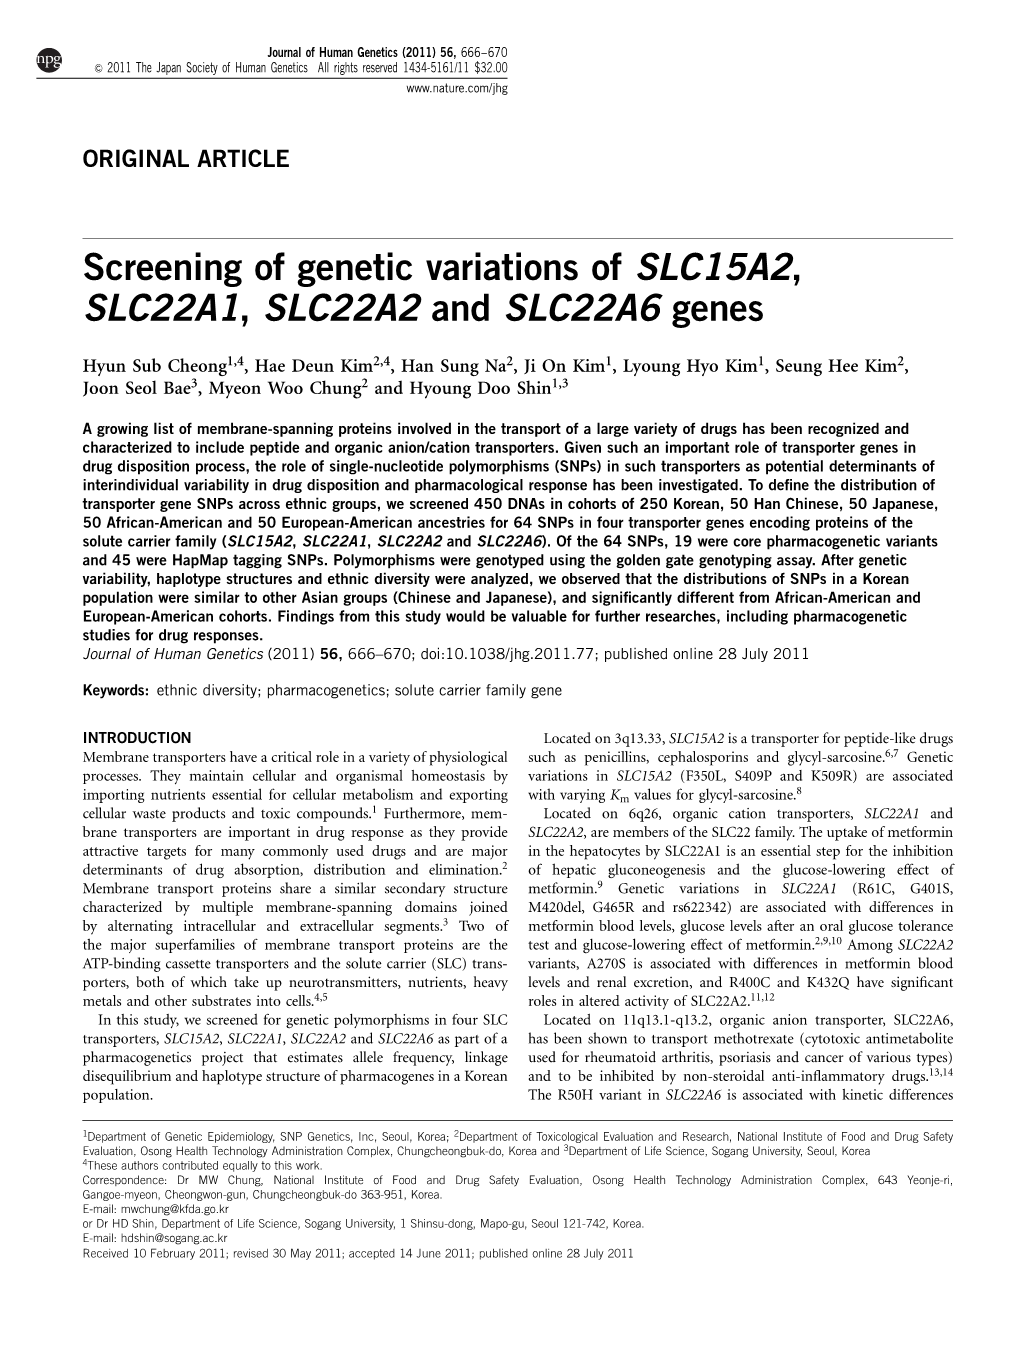 Screening of Genetic Variations of SLC15A2, SLC22A1, SLC22A2 and SLC22A6 Genes